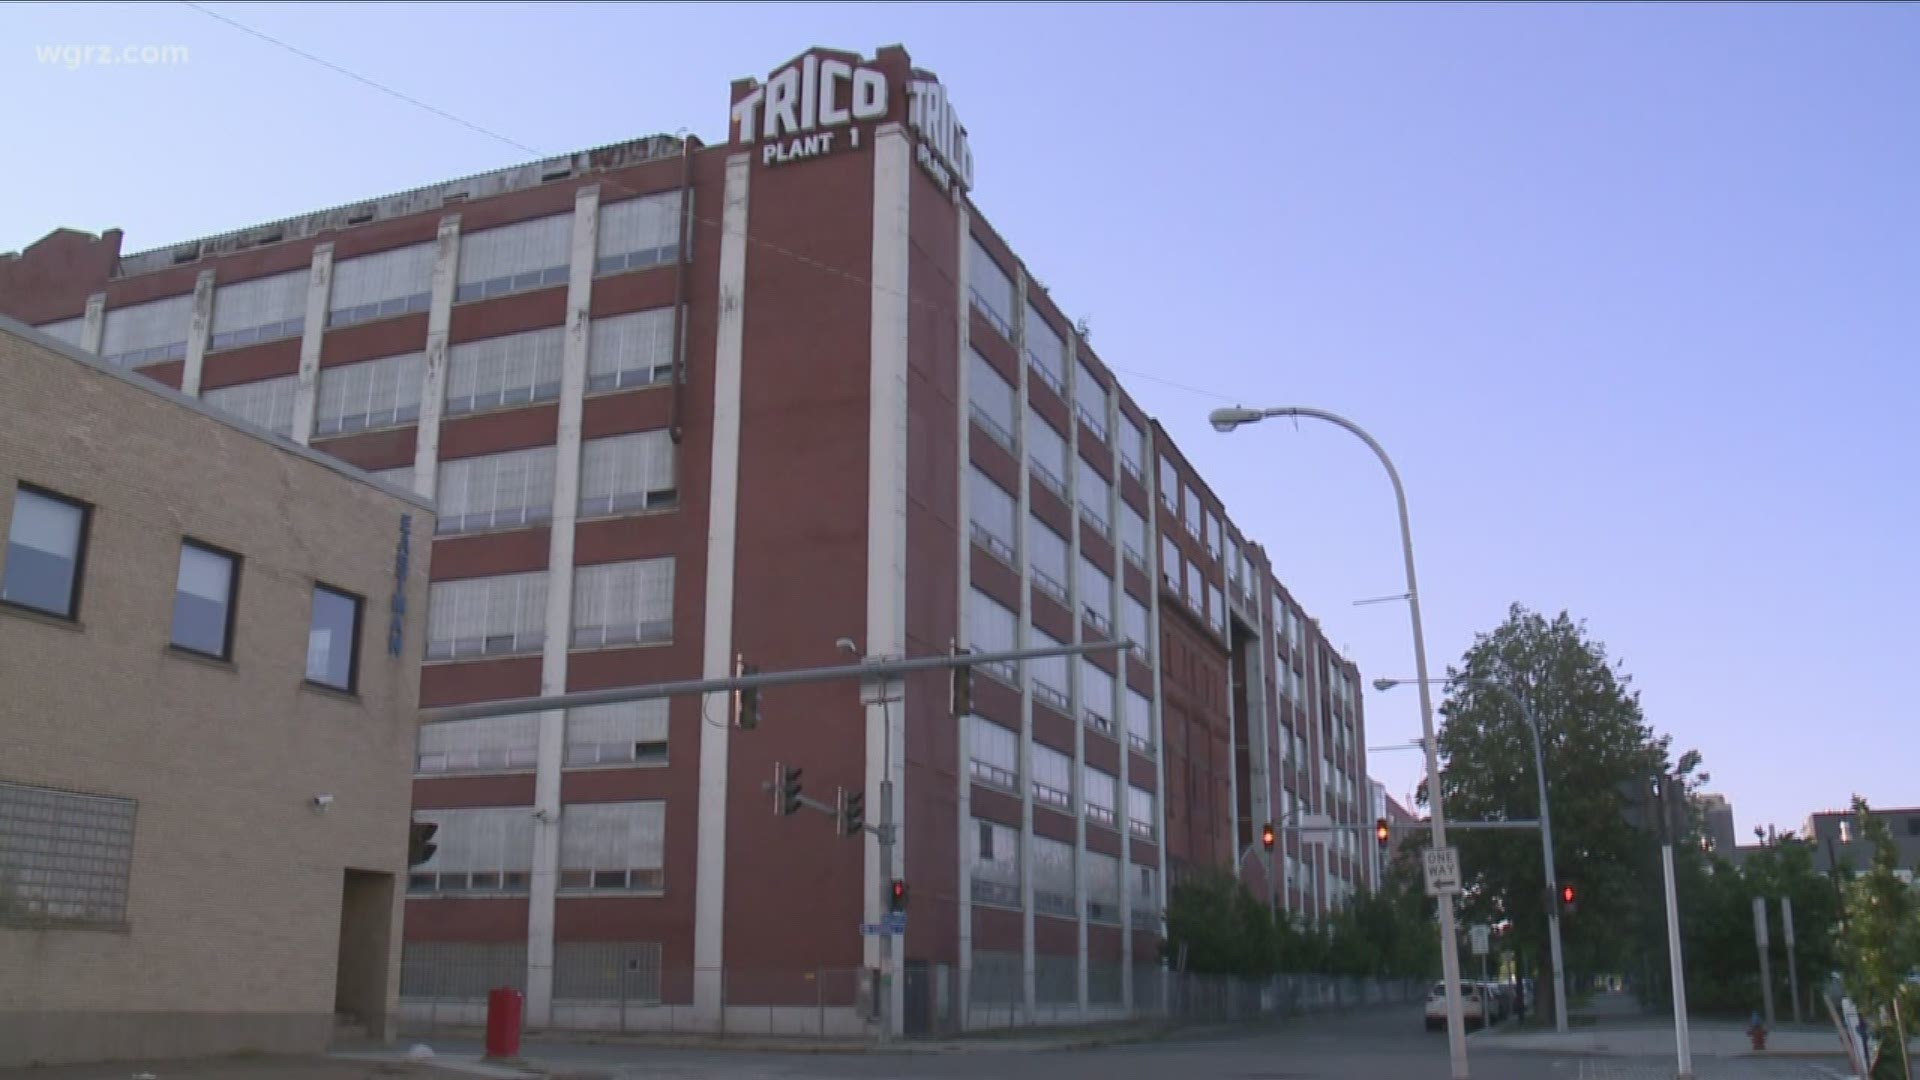 A massive redevelopment project is now underway at the Trico Building.